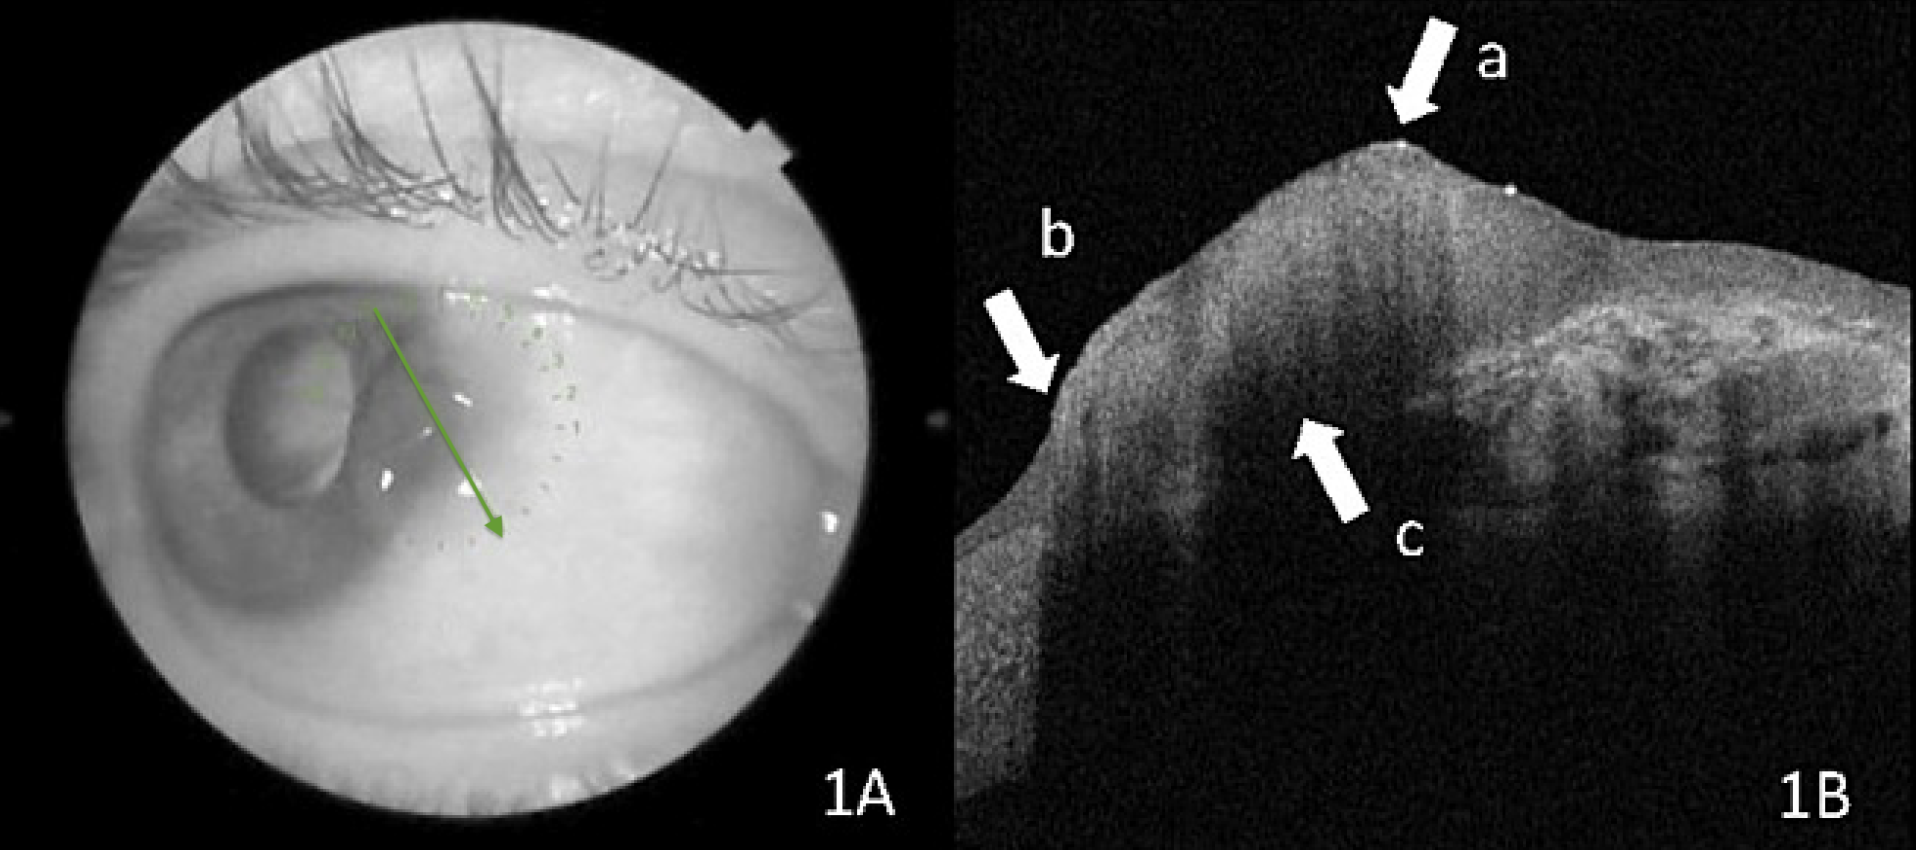 OSSN lesion at the slit lamp and on OCT. The green arrow represents the direction and location of the scans. Arrow A shows a thickened hyperreflective epithelium, arrow B highlights the abrupt transition between abnormal and normal epithelium and arrow C denotes the line of cleavage between the tumor and the surrounding tissue.